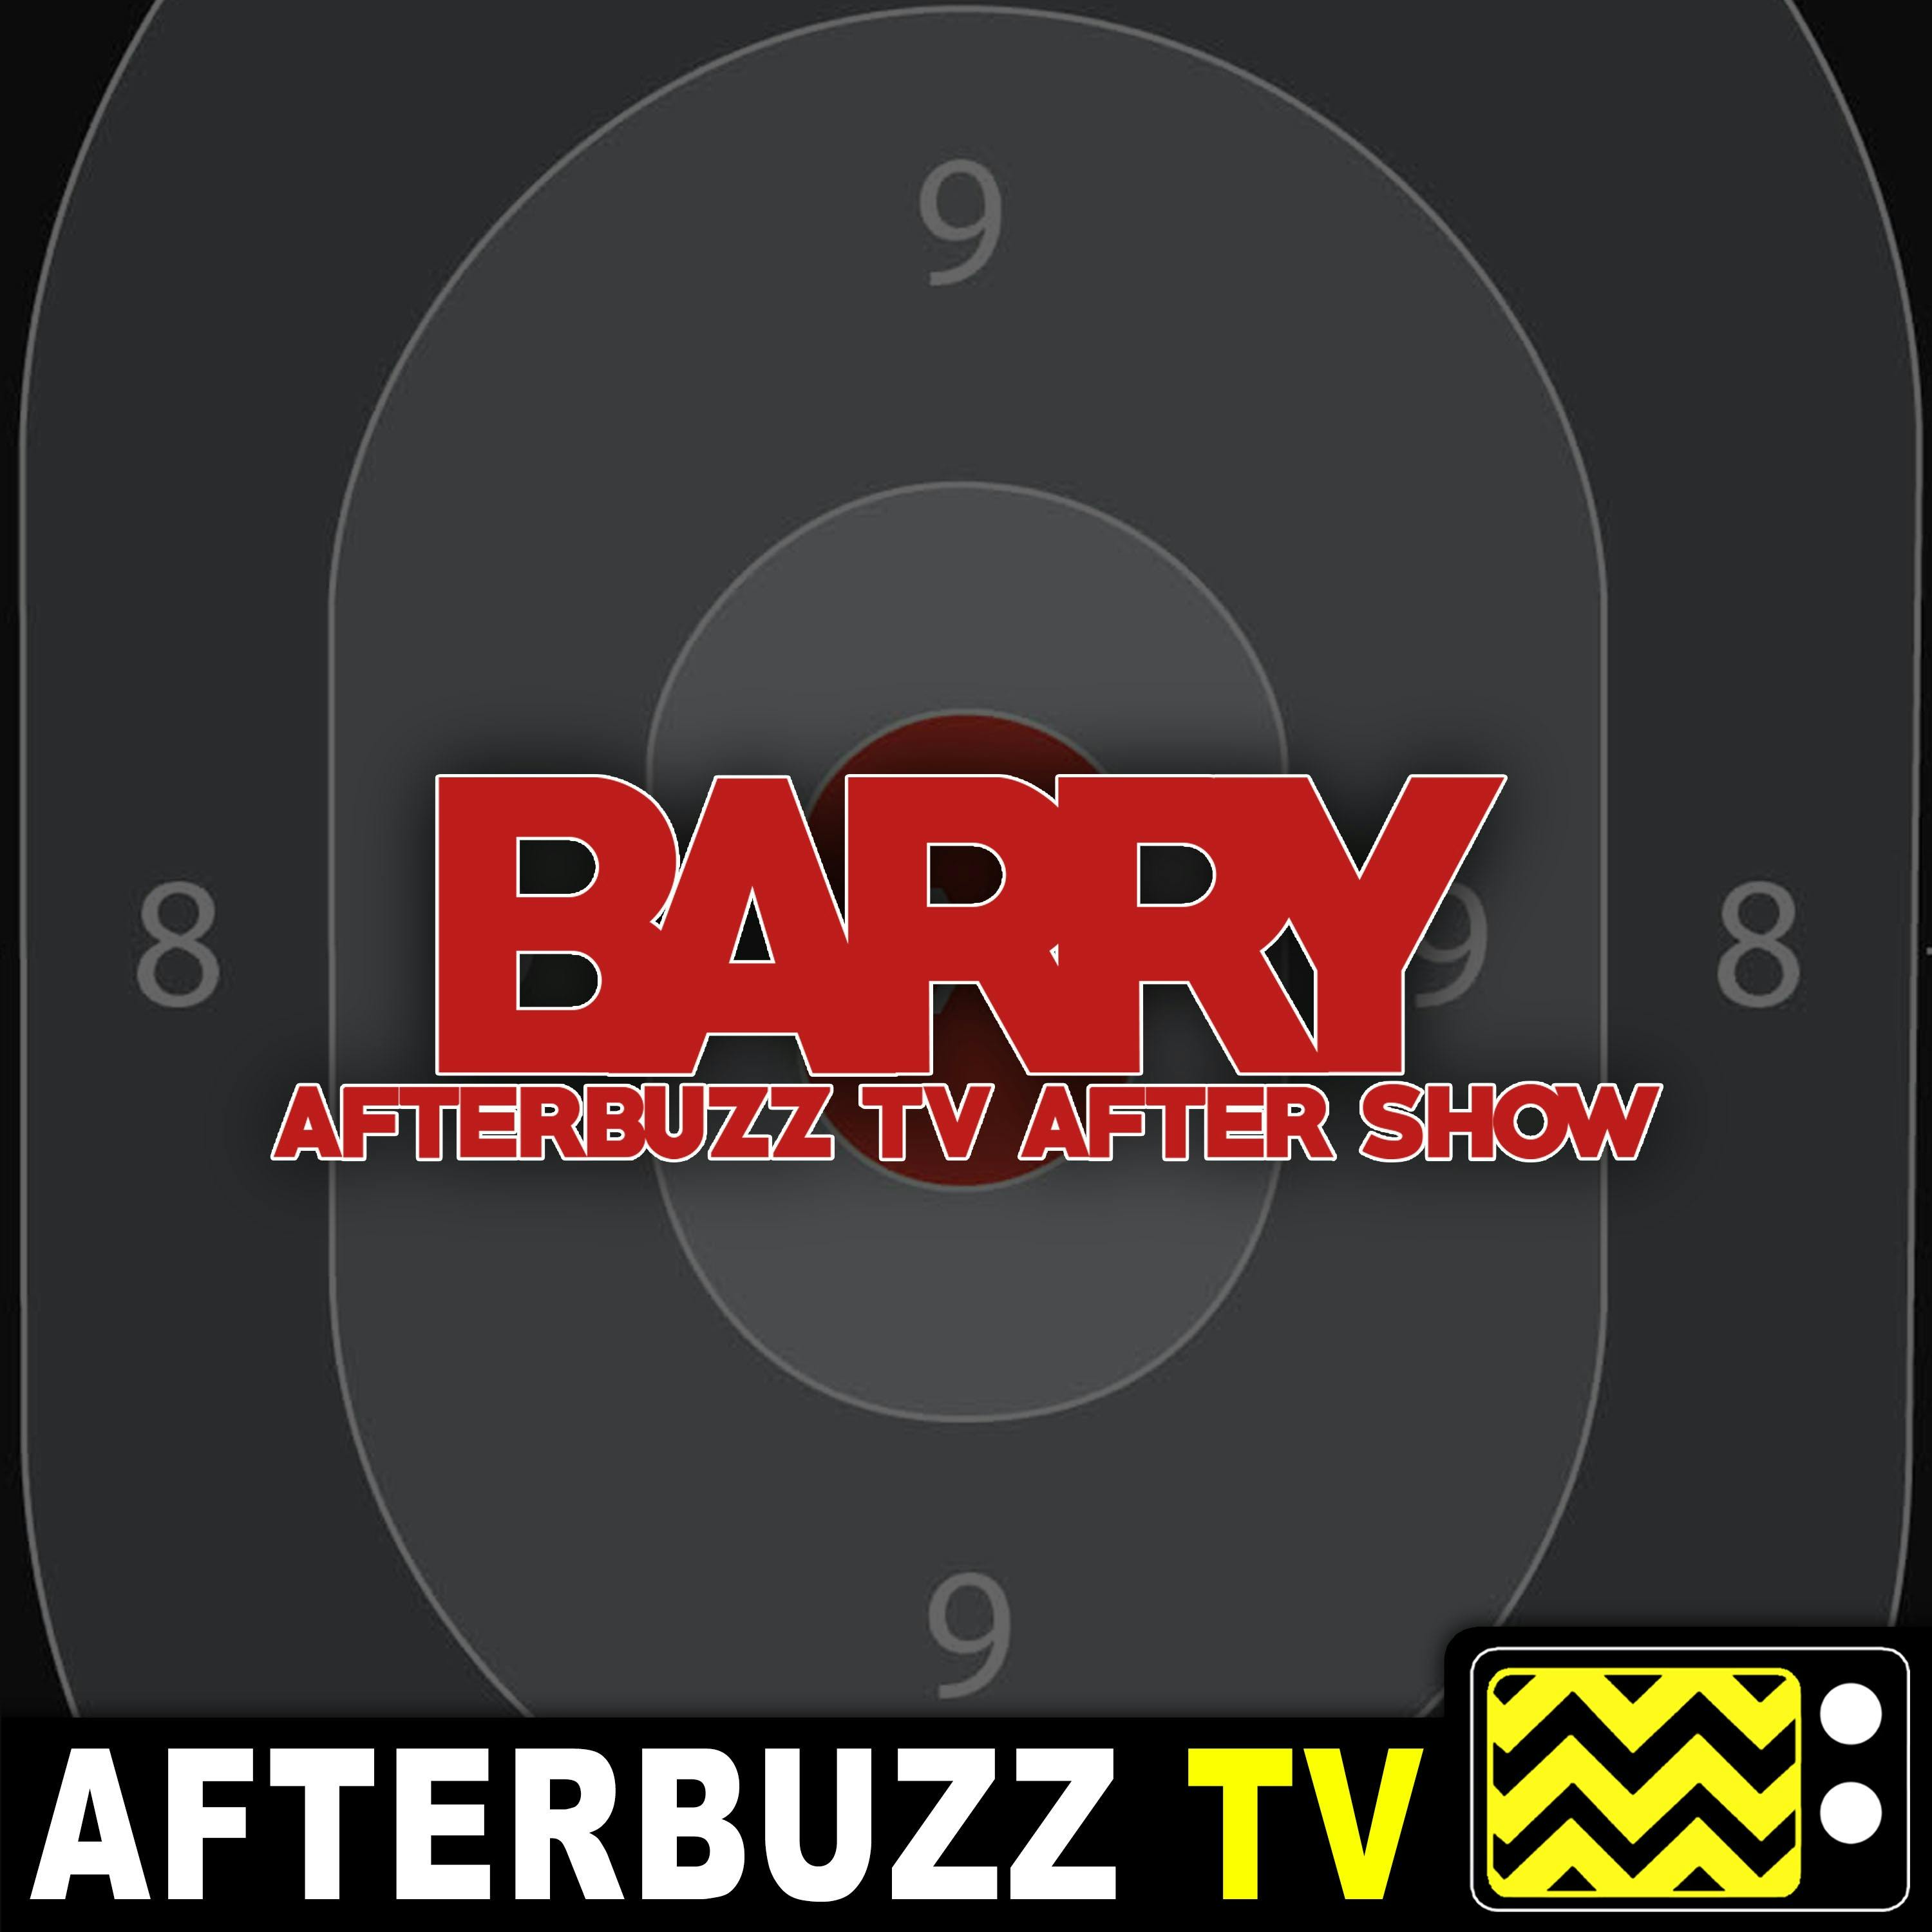 Barry S:1 | Chapter 7: Loud, Fast and Keep Going E:7 | AfterBuzz TV AfterShow